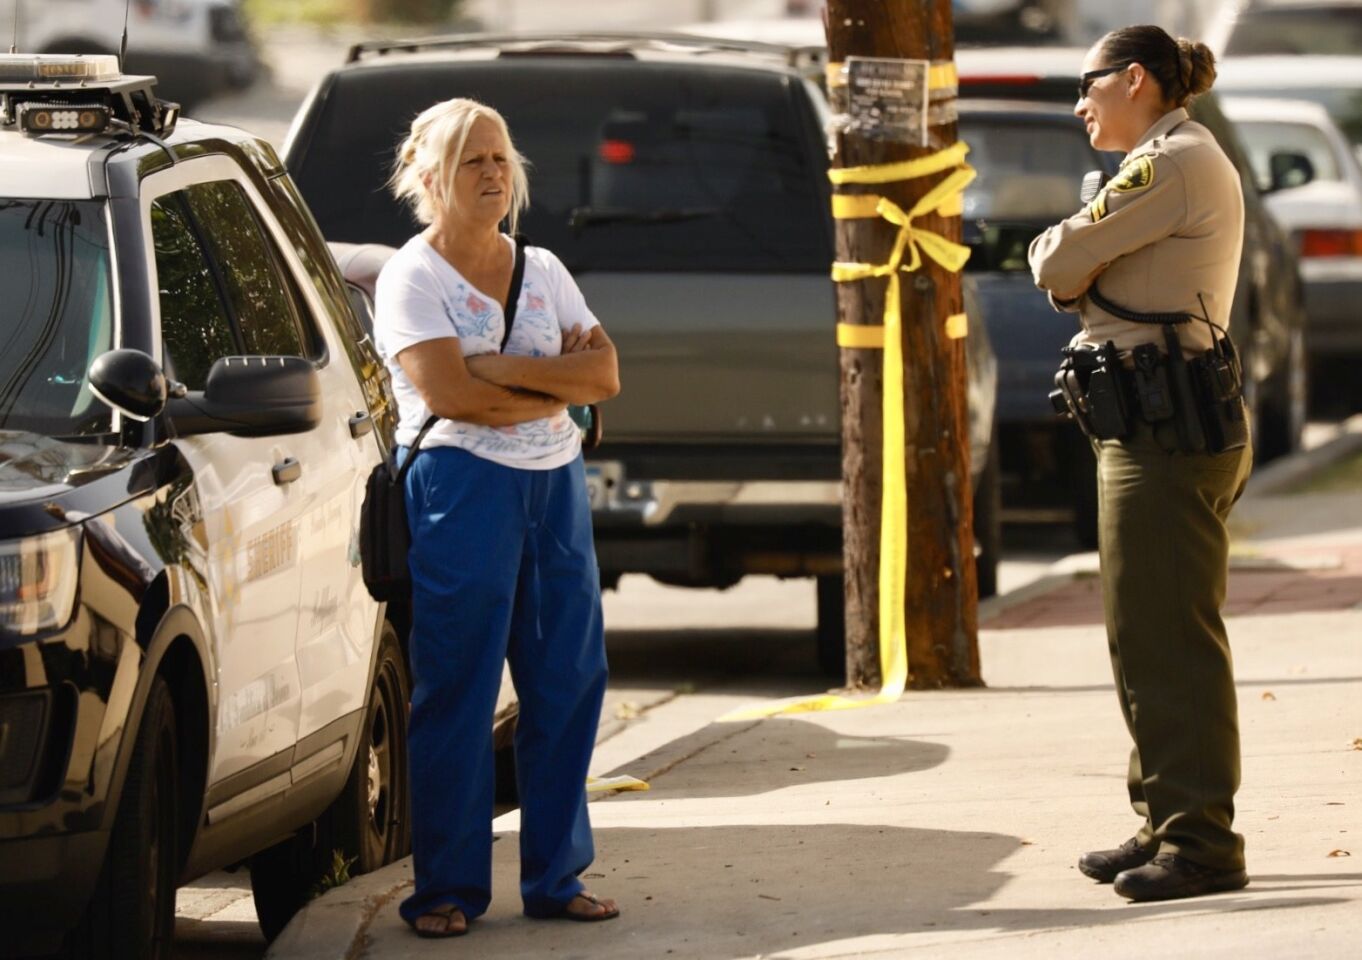 The mother of Rene Herrera, 39, speaks with a sheriff's official. Her son was killed after he opened fire on sheriff's deputies.